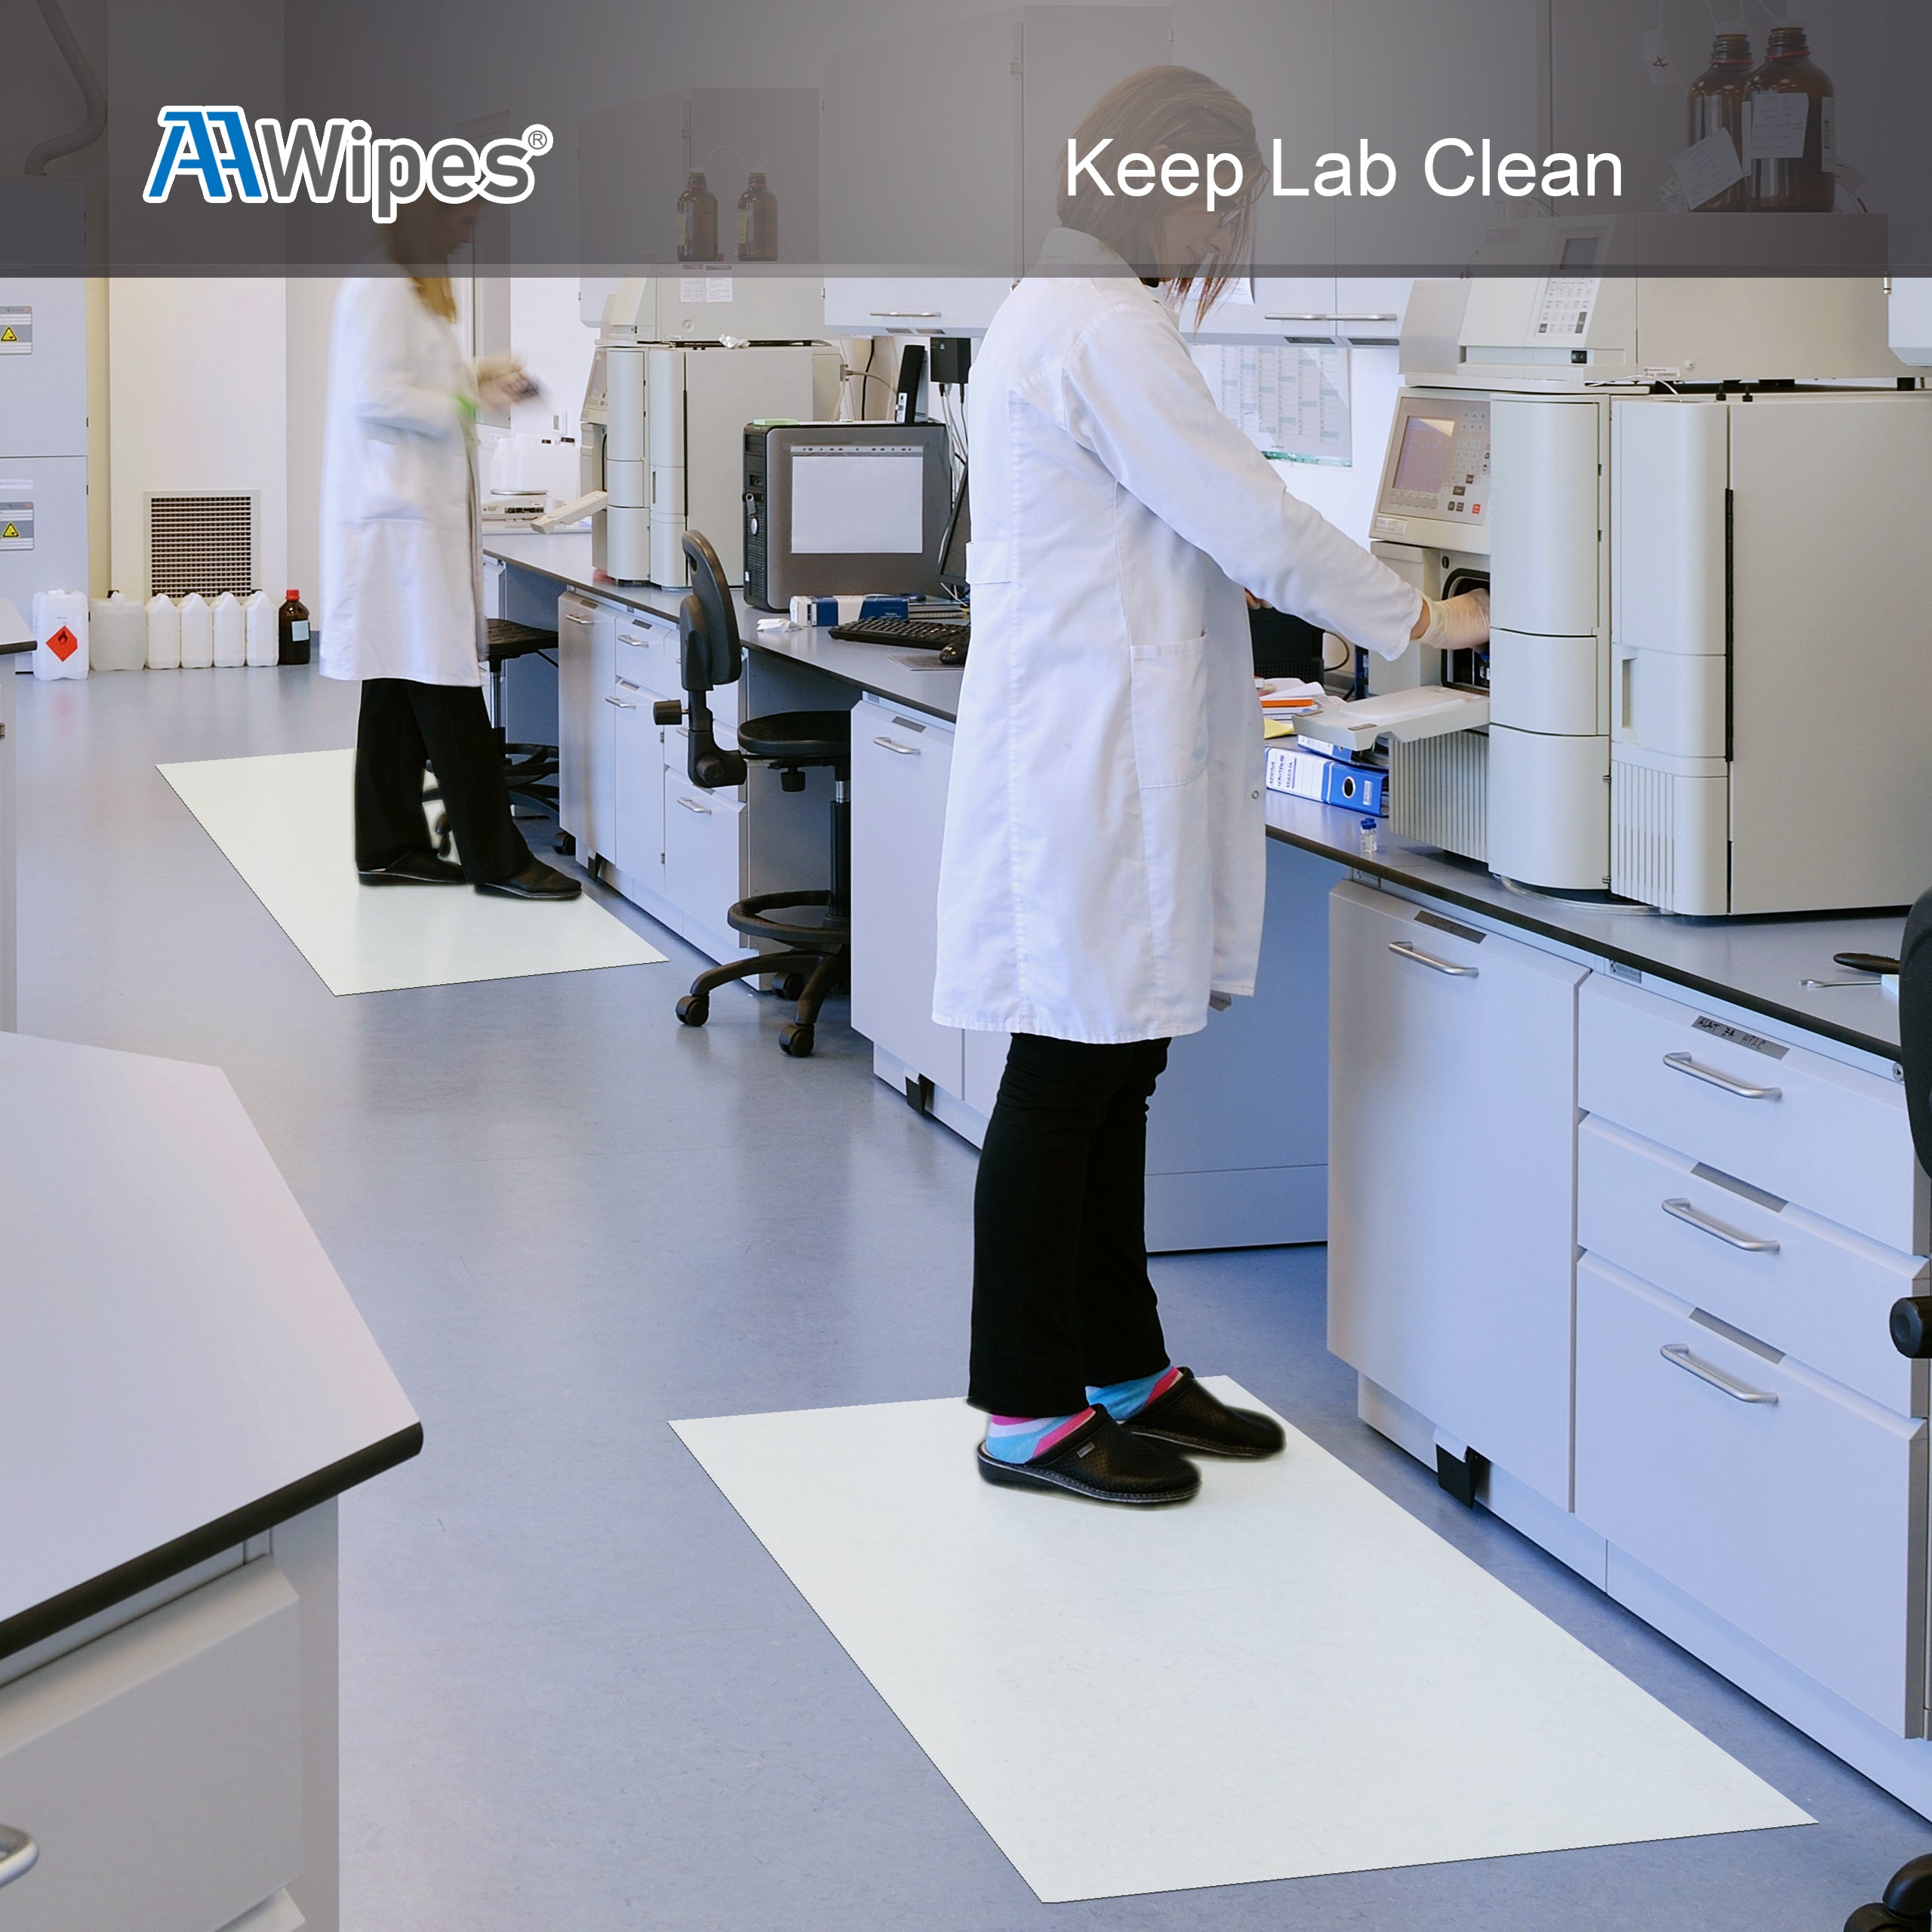 Cleanroom Sticky Floor Mats 24"X36" White for Microelectronics, Aerospace, Pharmaceuticals,Food Processing, Hospital, Lab, Biotechnology, Automotive (6,000 Sheets/200 Mats/20 Boxs/Case) (No. IPSM-2436-300-W)